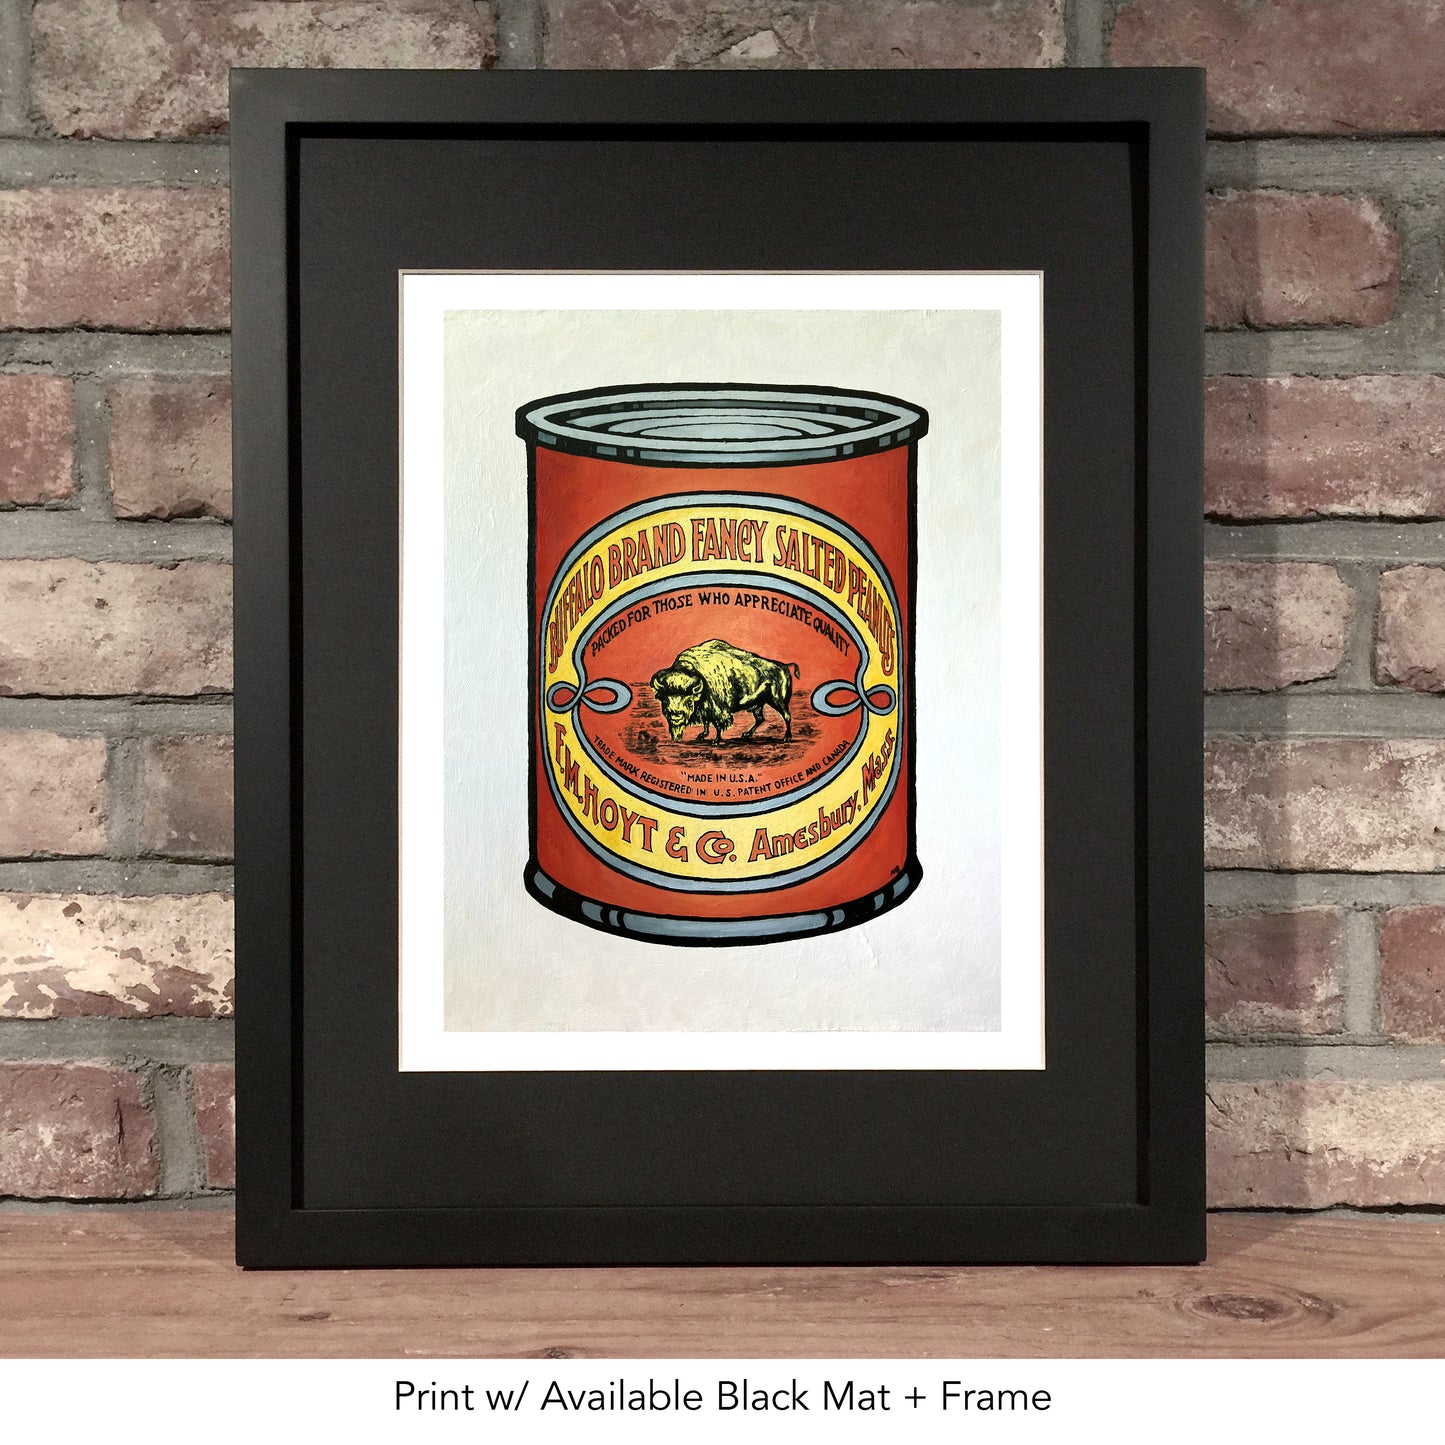 BUFFALO BRAND Fancy Salted Peanuts Can // Oil Painting [F.M. Hoyt, Amesbury, Massachusetts]